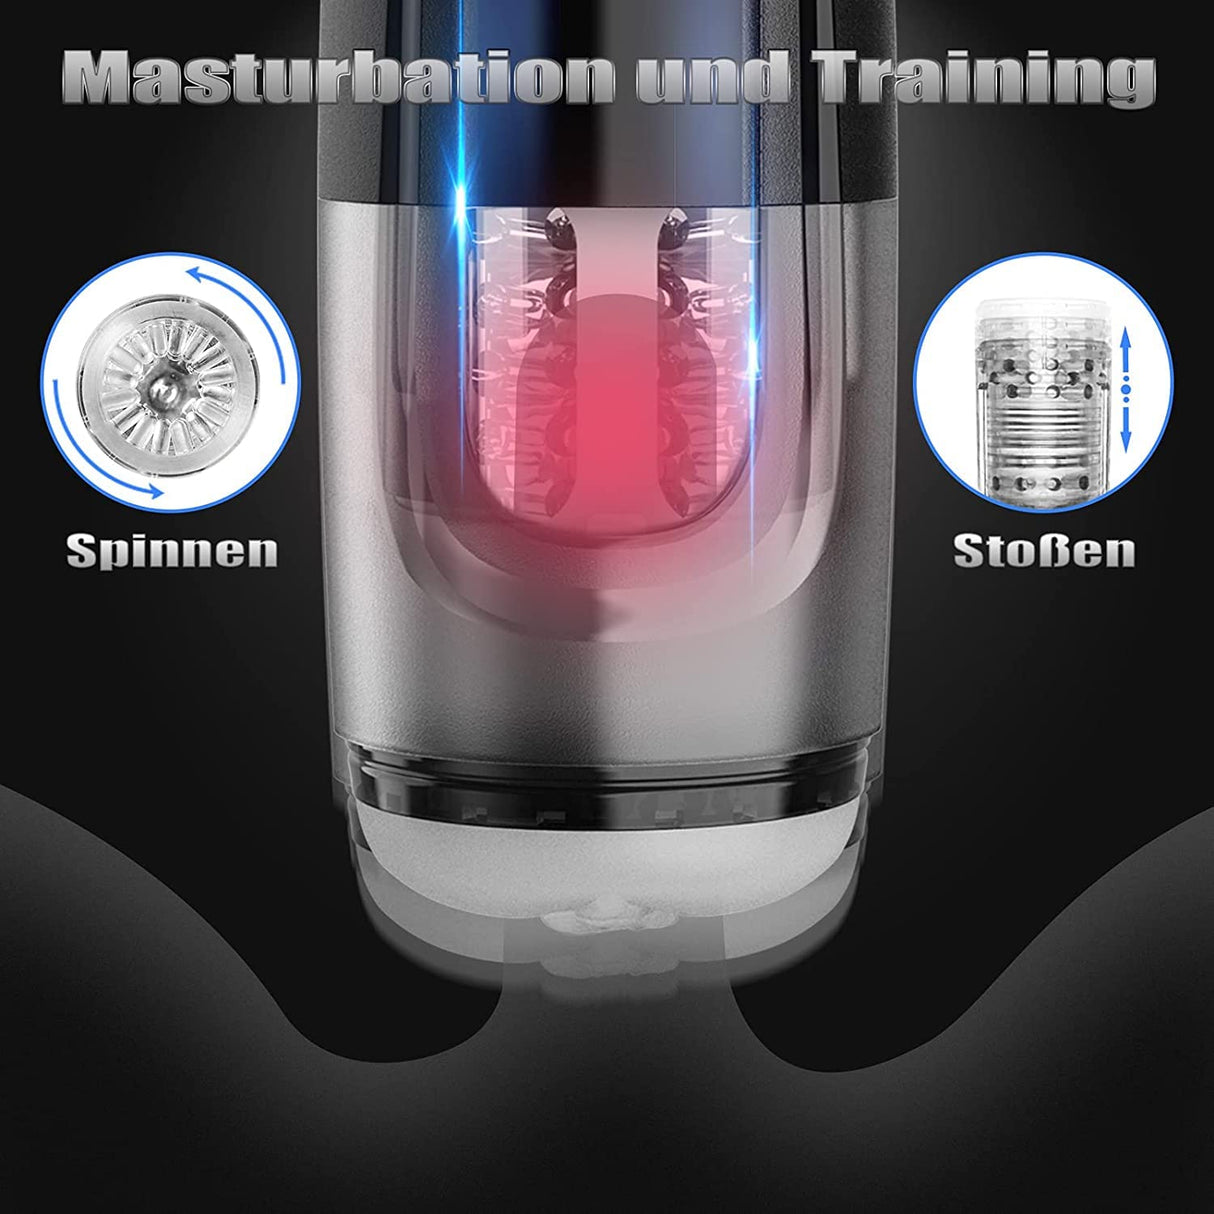 Werewolf 2-in-1 Fully Automatic Rotating Masturbation Cup